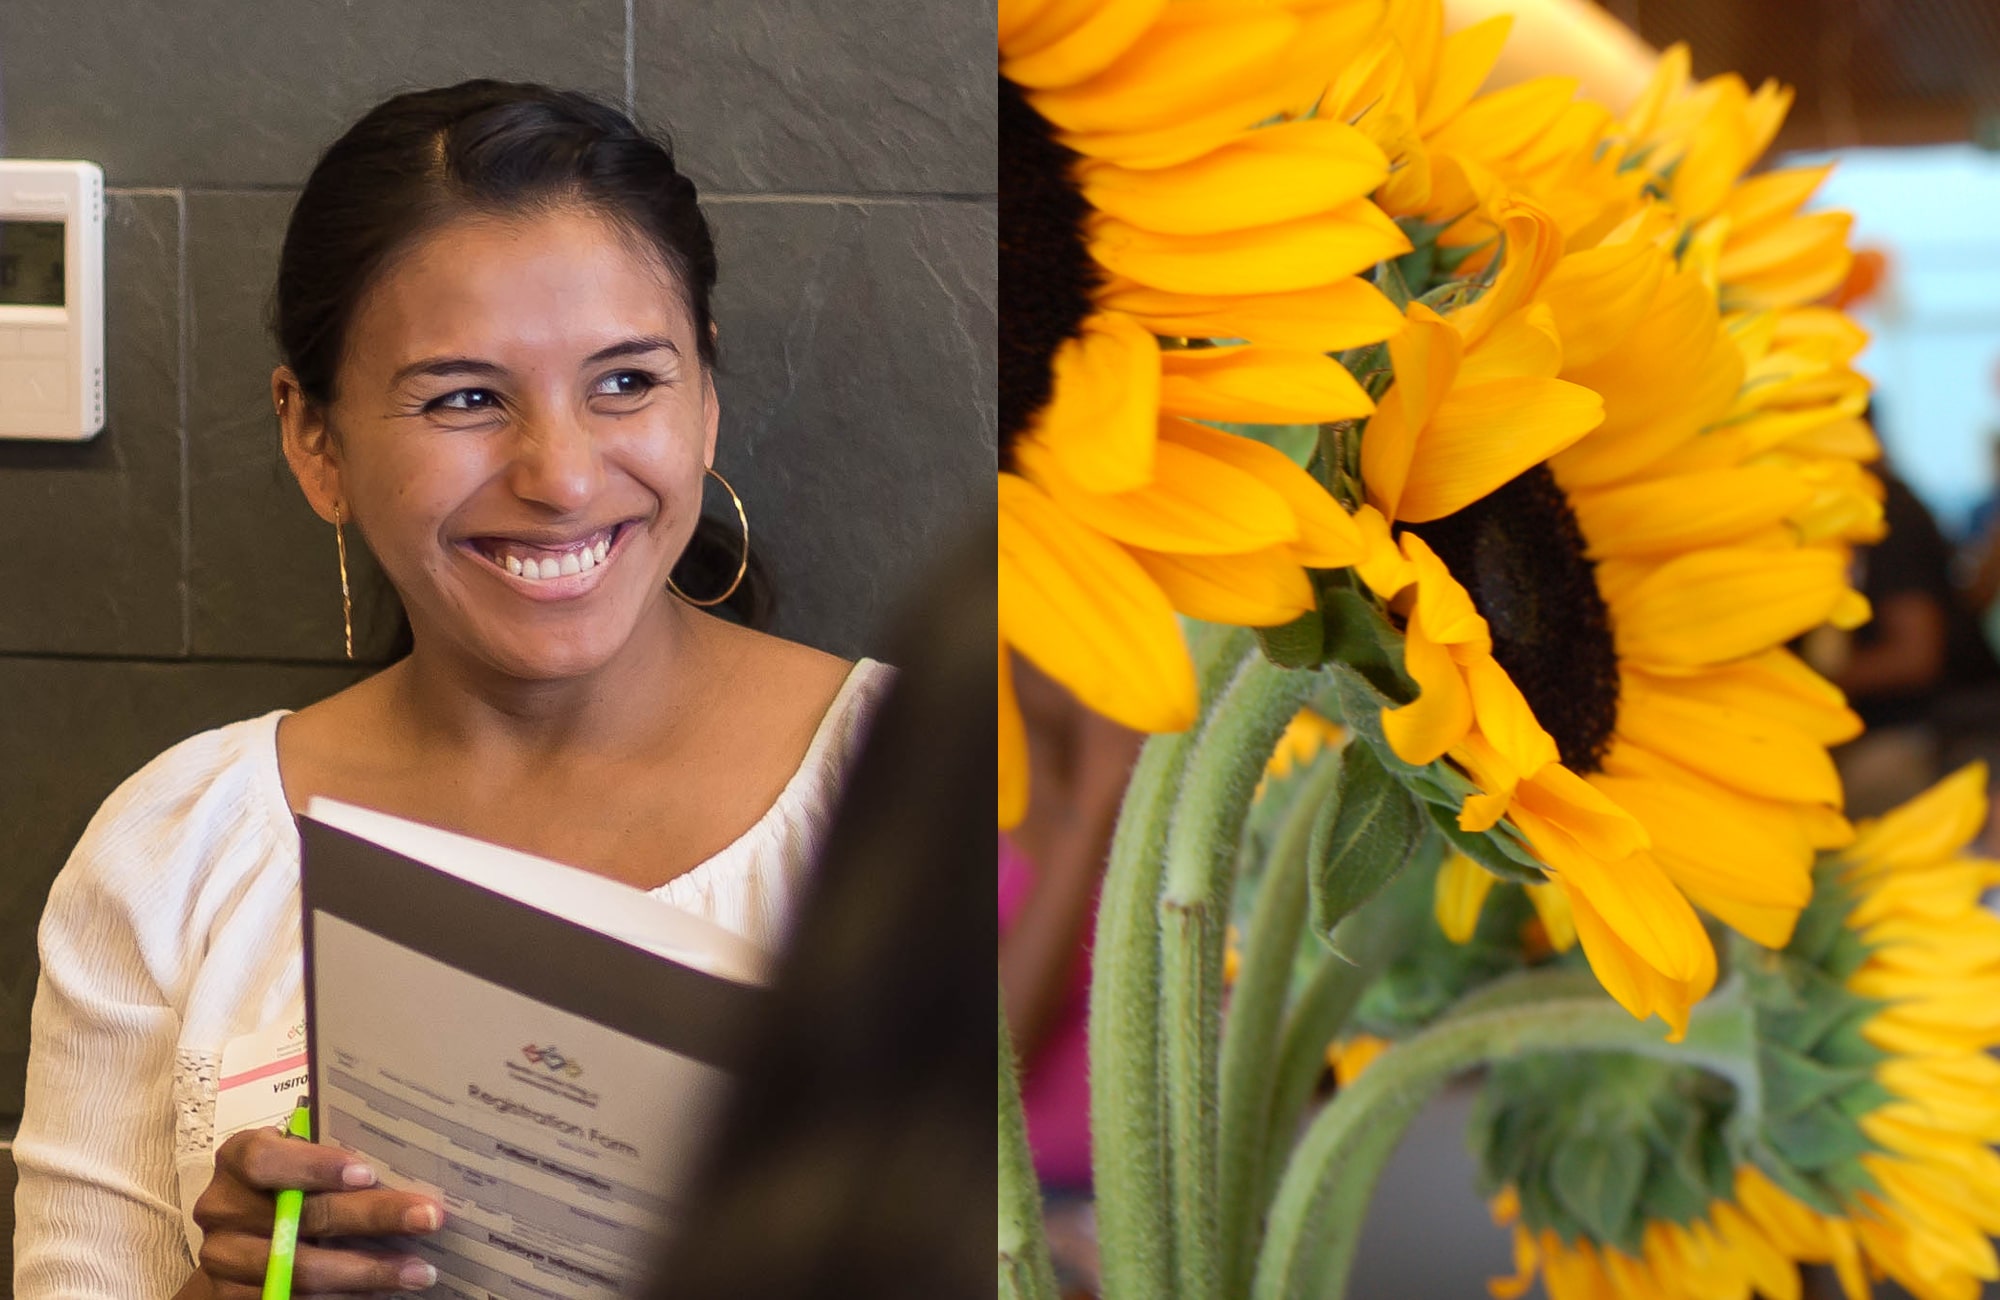 Collage of smiling Latina woman holding information packet on left, closeup of sunflowers on the right